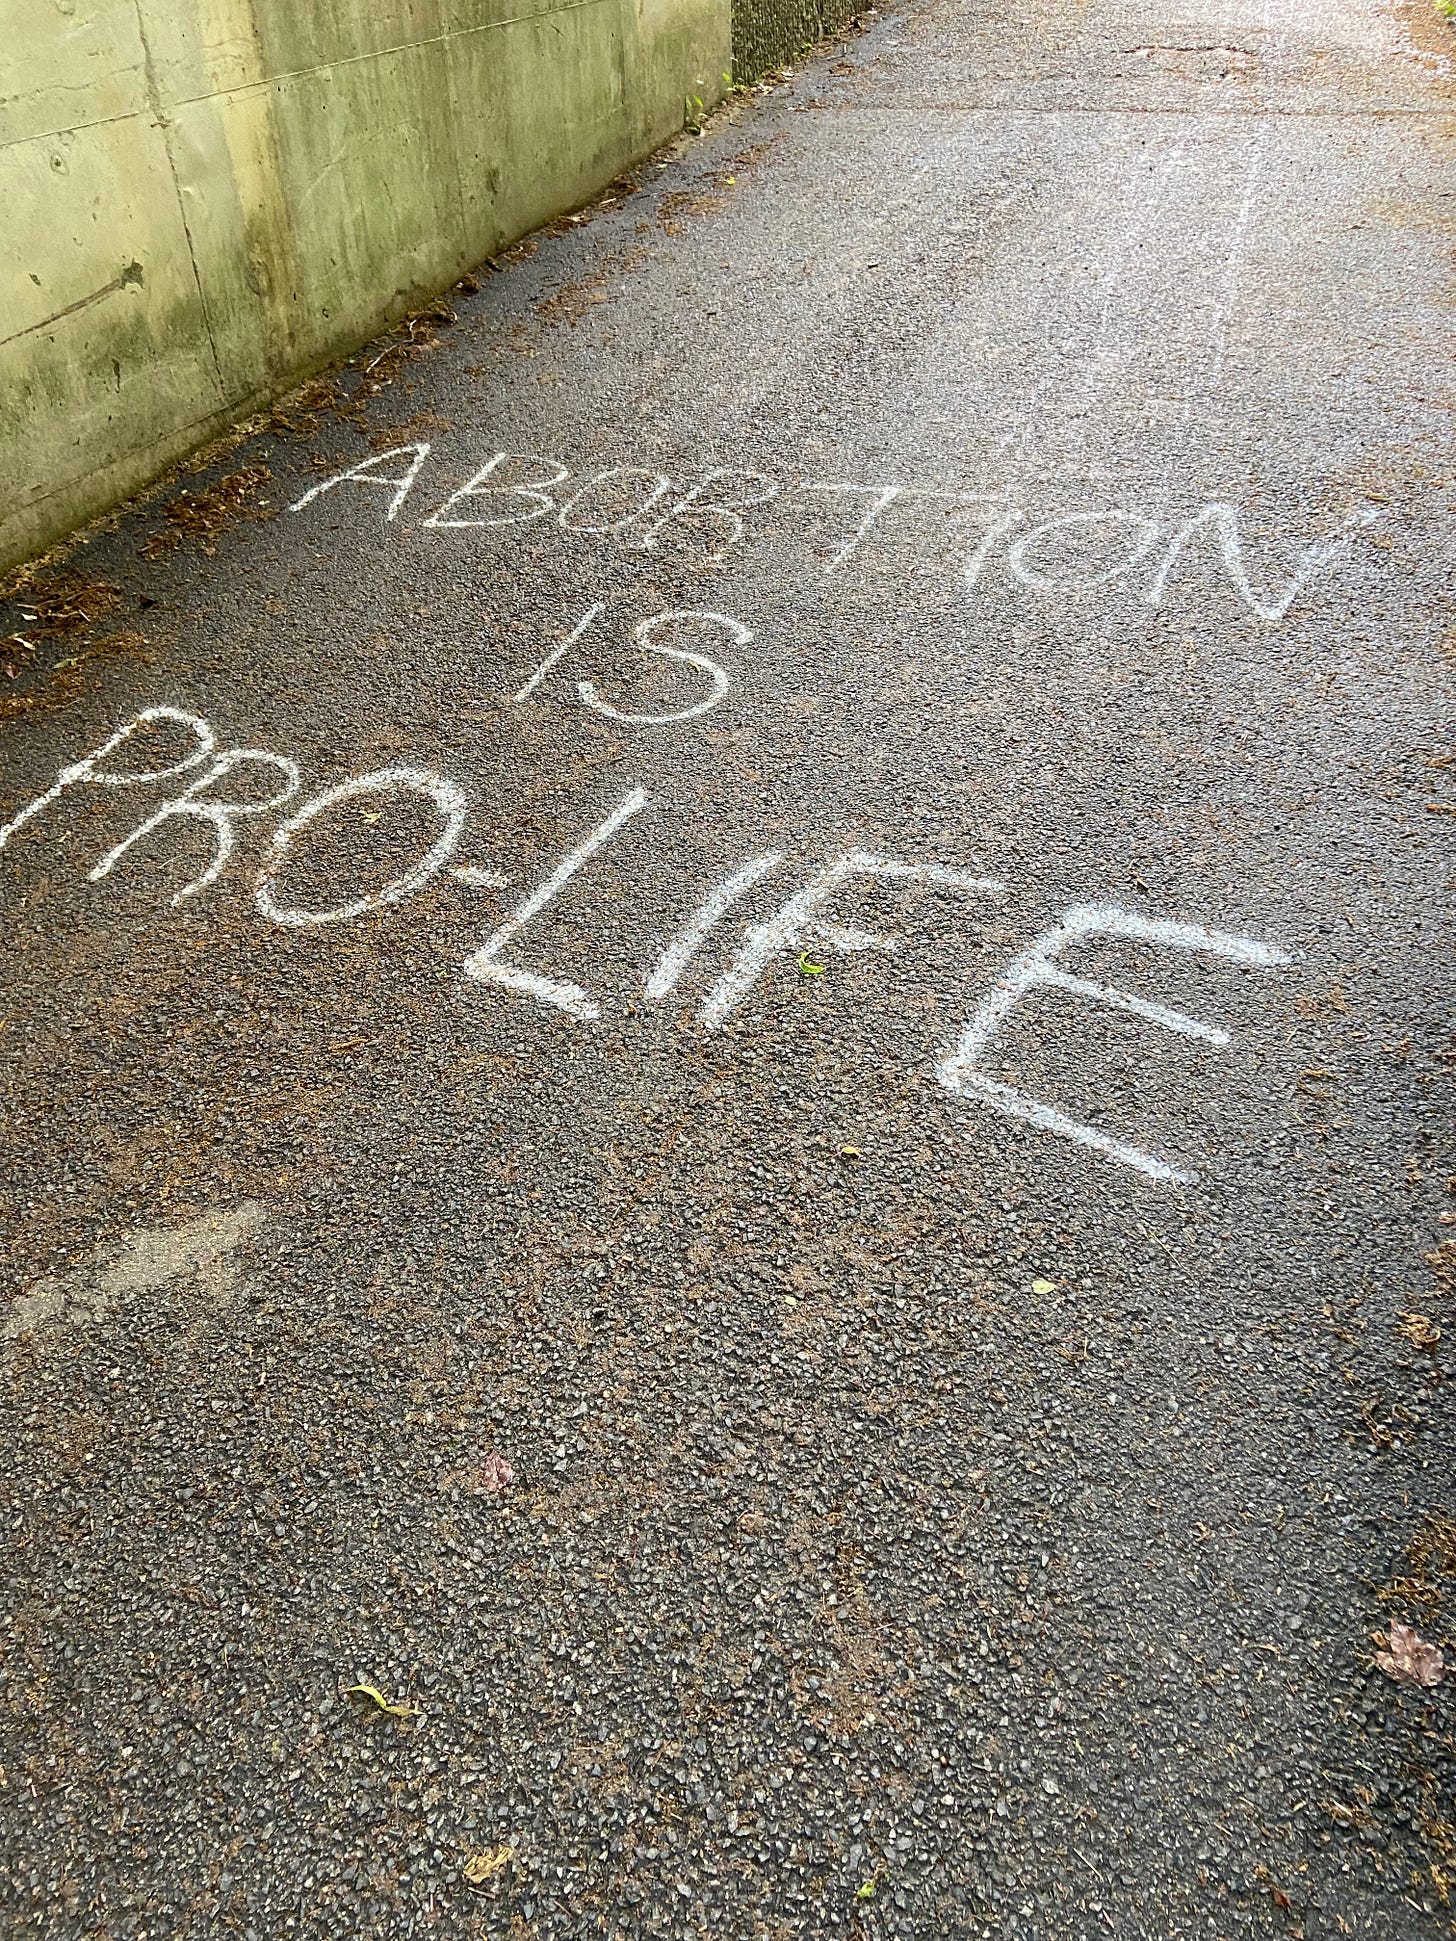 White spray paint on black pavement says ABORTION IS PRO-LIFE